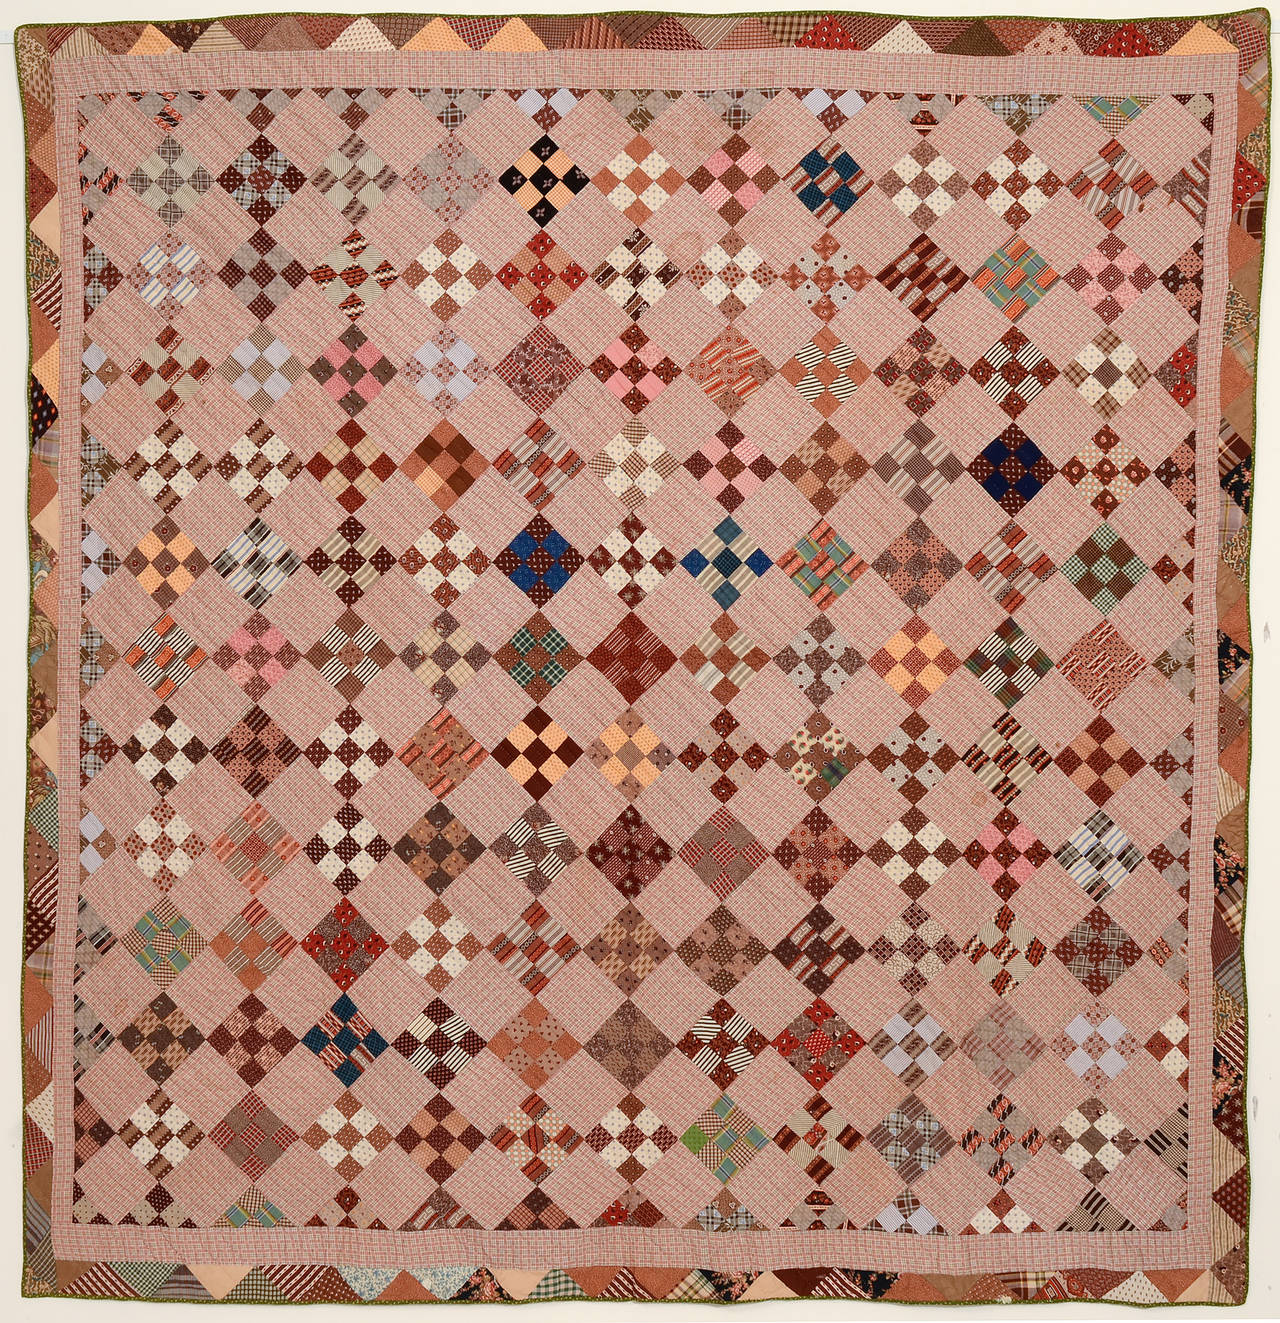 This nine-patch quilt is made of a fabulous grouping of late 19th century printed fabrics. The plaid off blocks are a nice extension of the nine-patch theme. Half blocks form a great inner border in addition to the triangles on the outside edge.